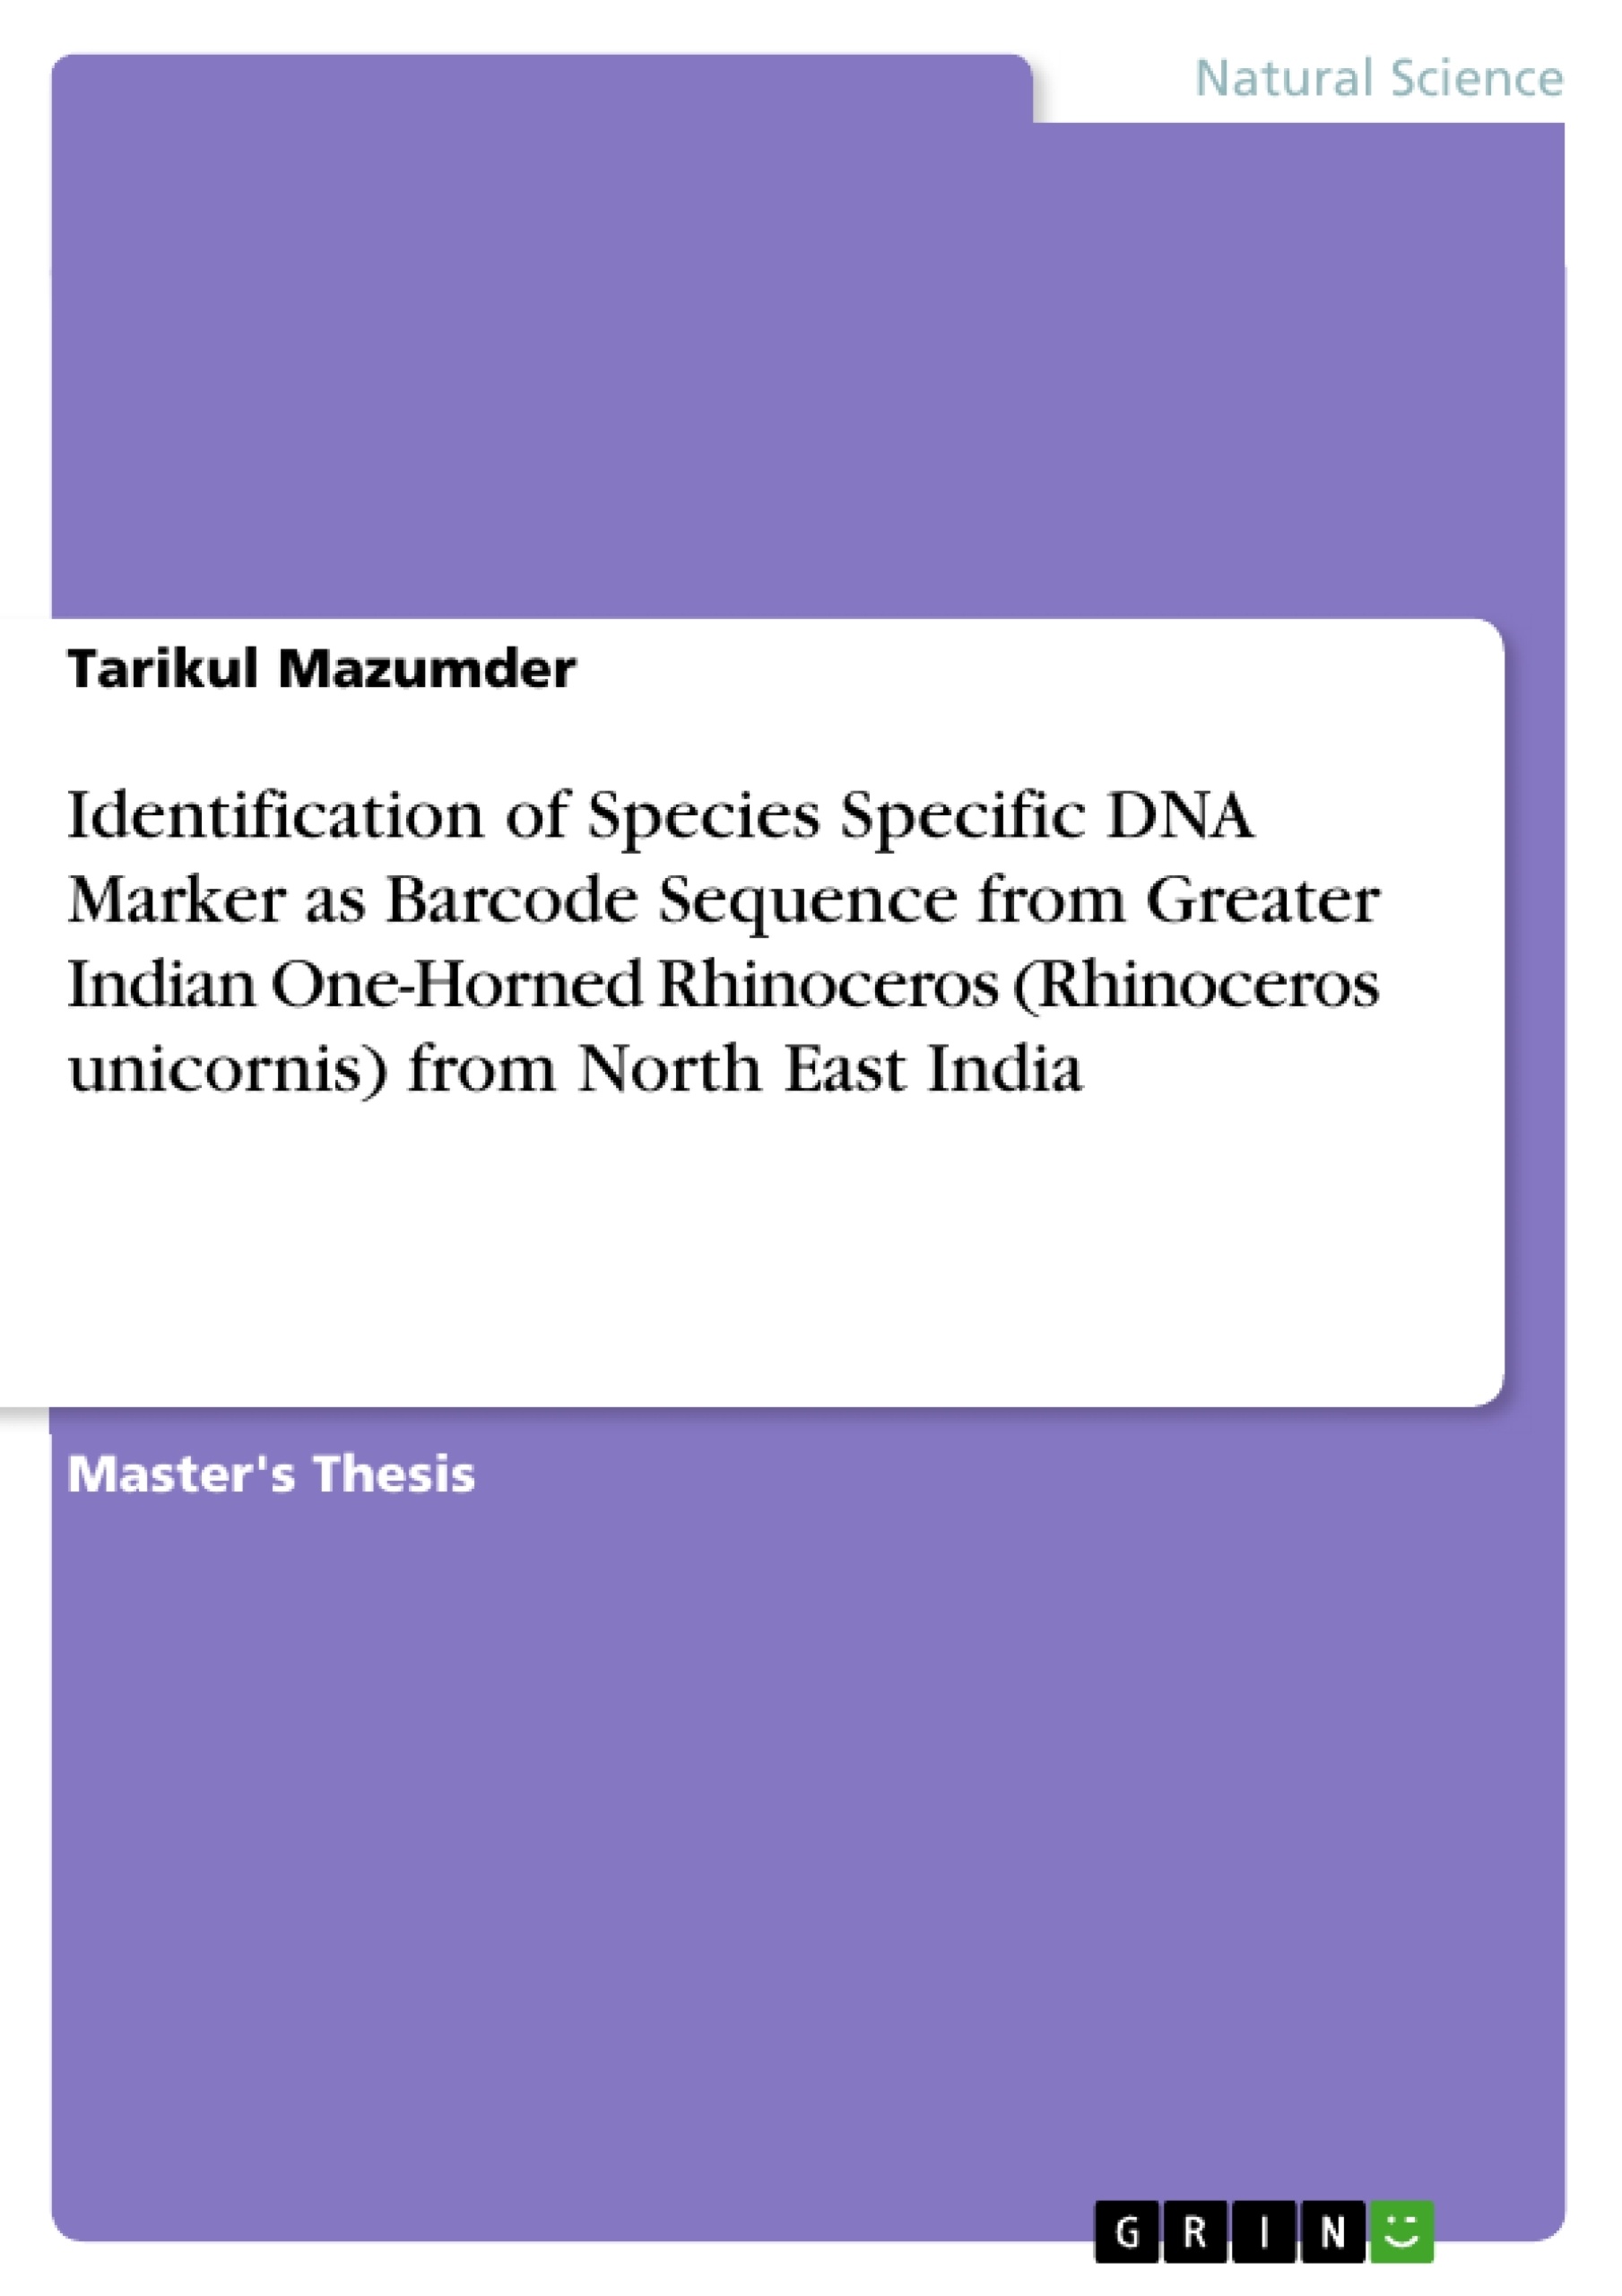 Titre: Identification of Species Specific DNA Marker as Barcode Sequence from Greater Indian One-Horned Rhinoceros (Rhinoceros unicornis) from North East India